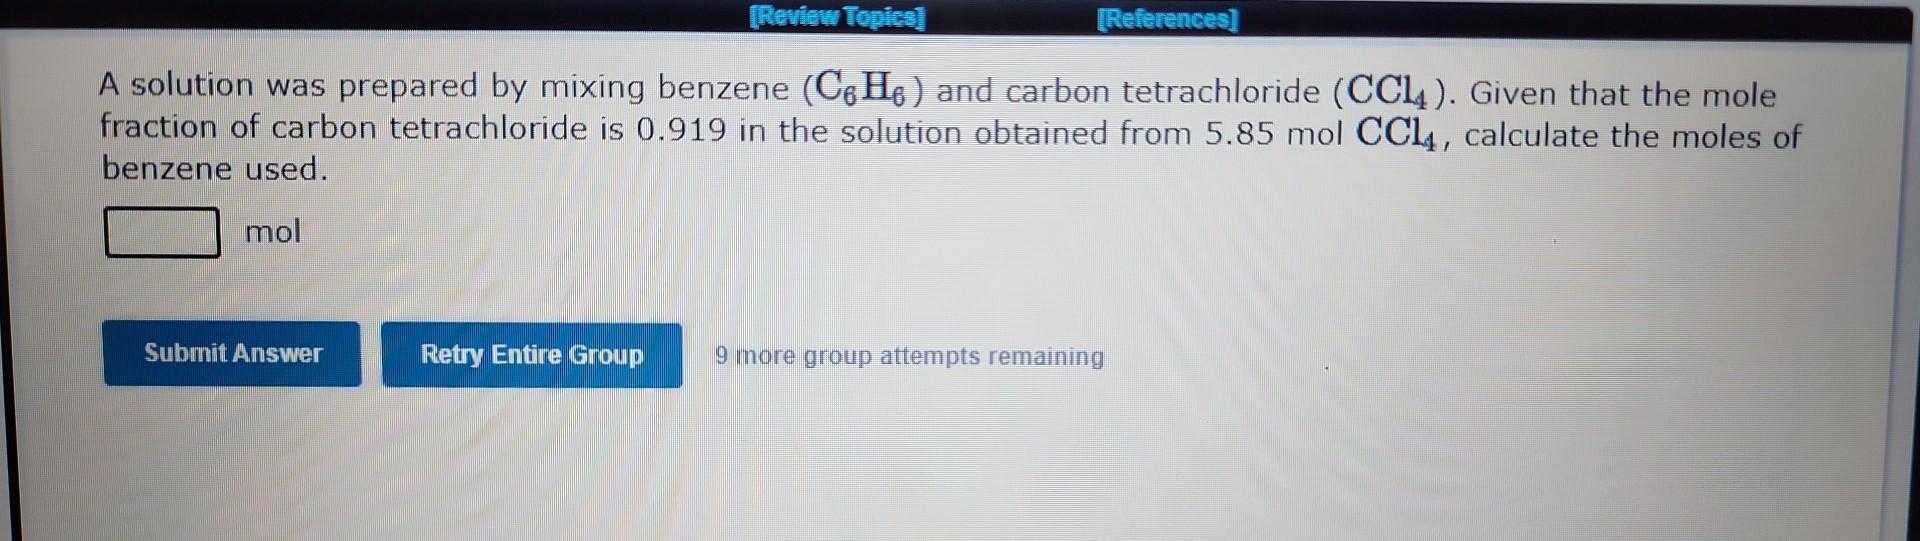 A solution was prepared by mixing benzene \( \left(\mathrm{C}_{6} \mathrm{H}_{6}\right) \) and carbon tetrachloride \( \left(